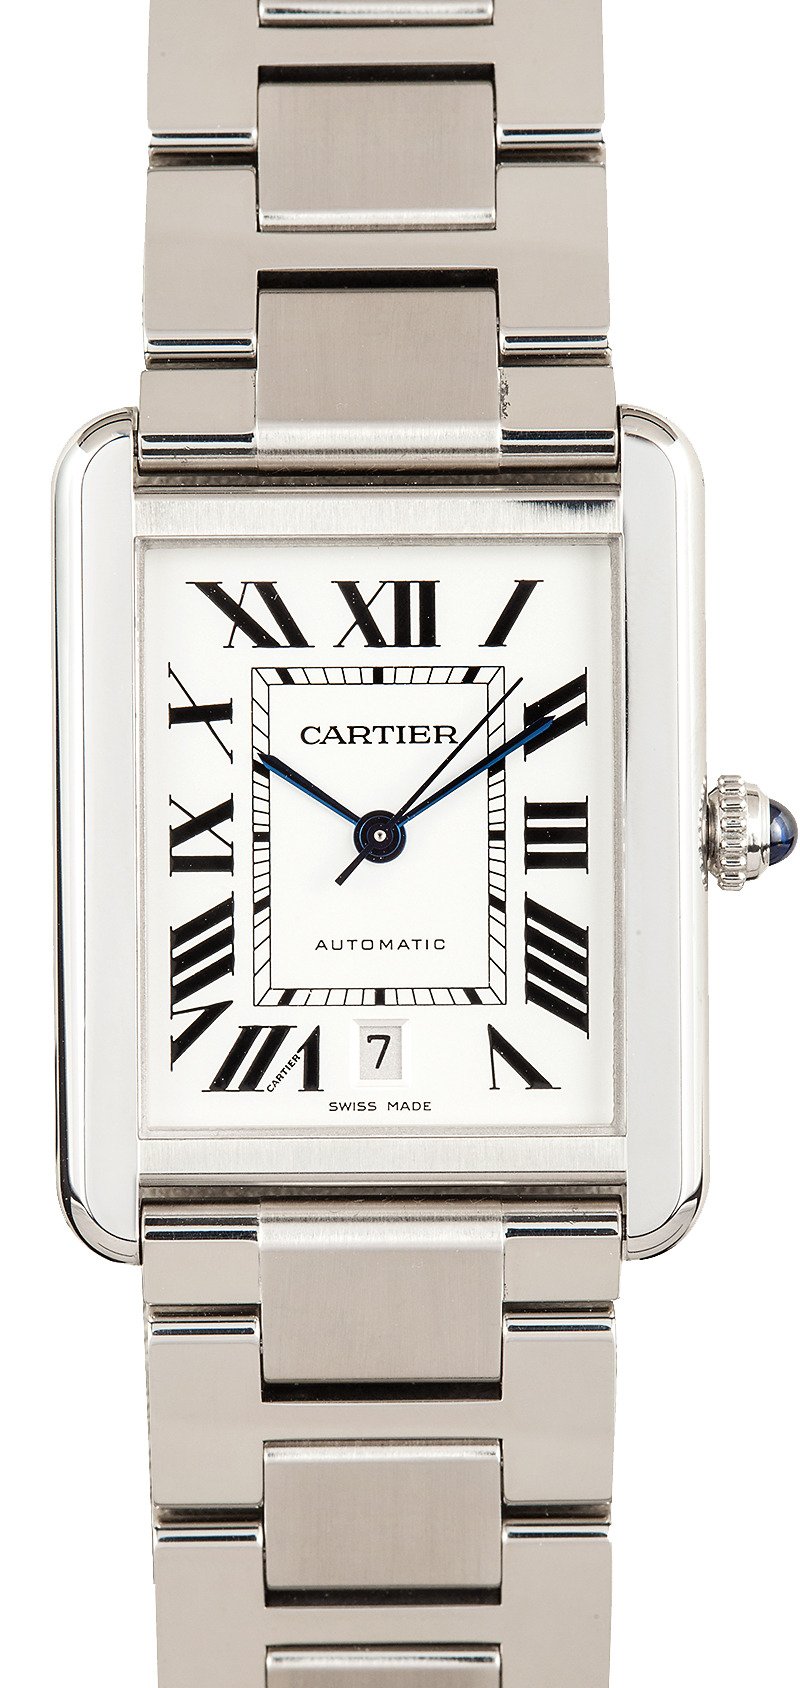 used cartier men's tank watches